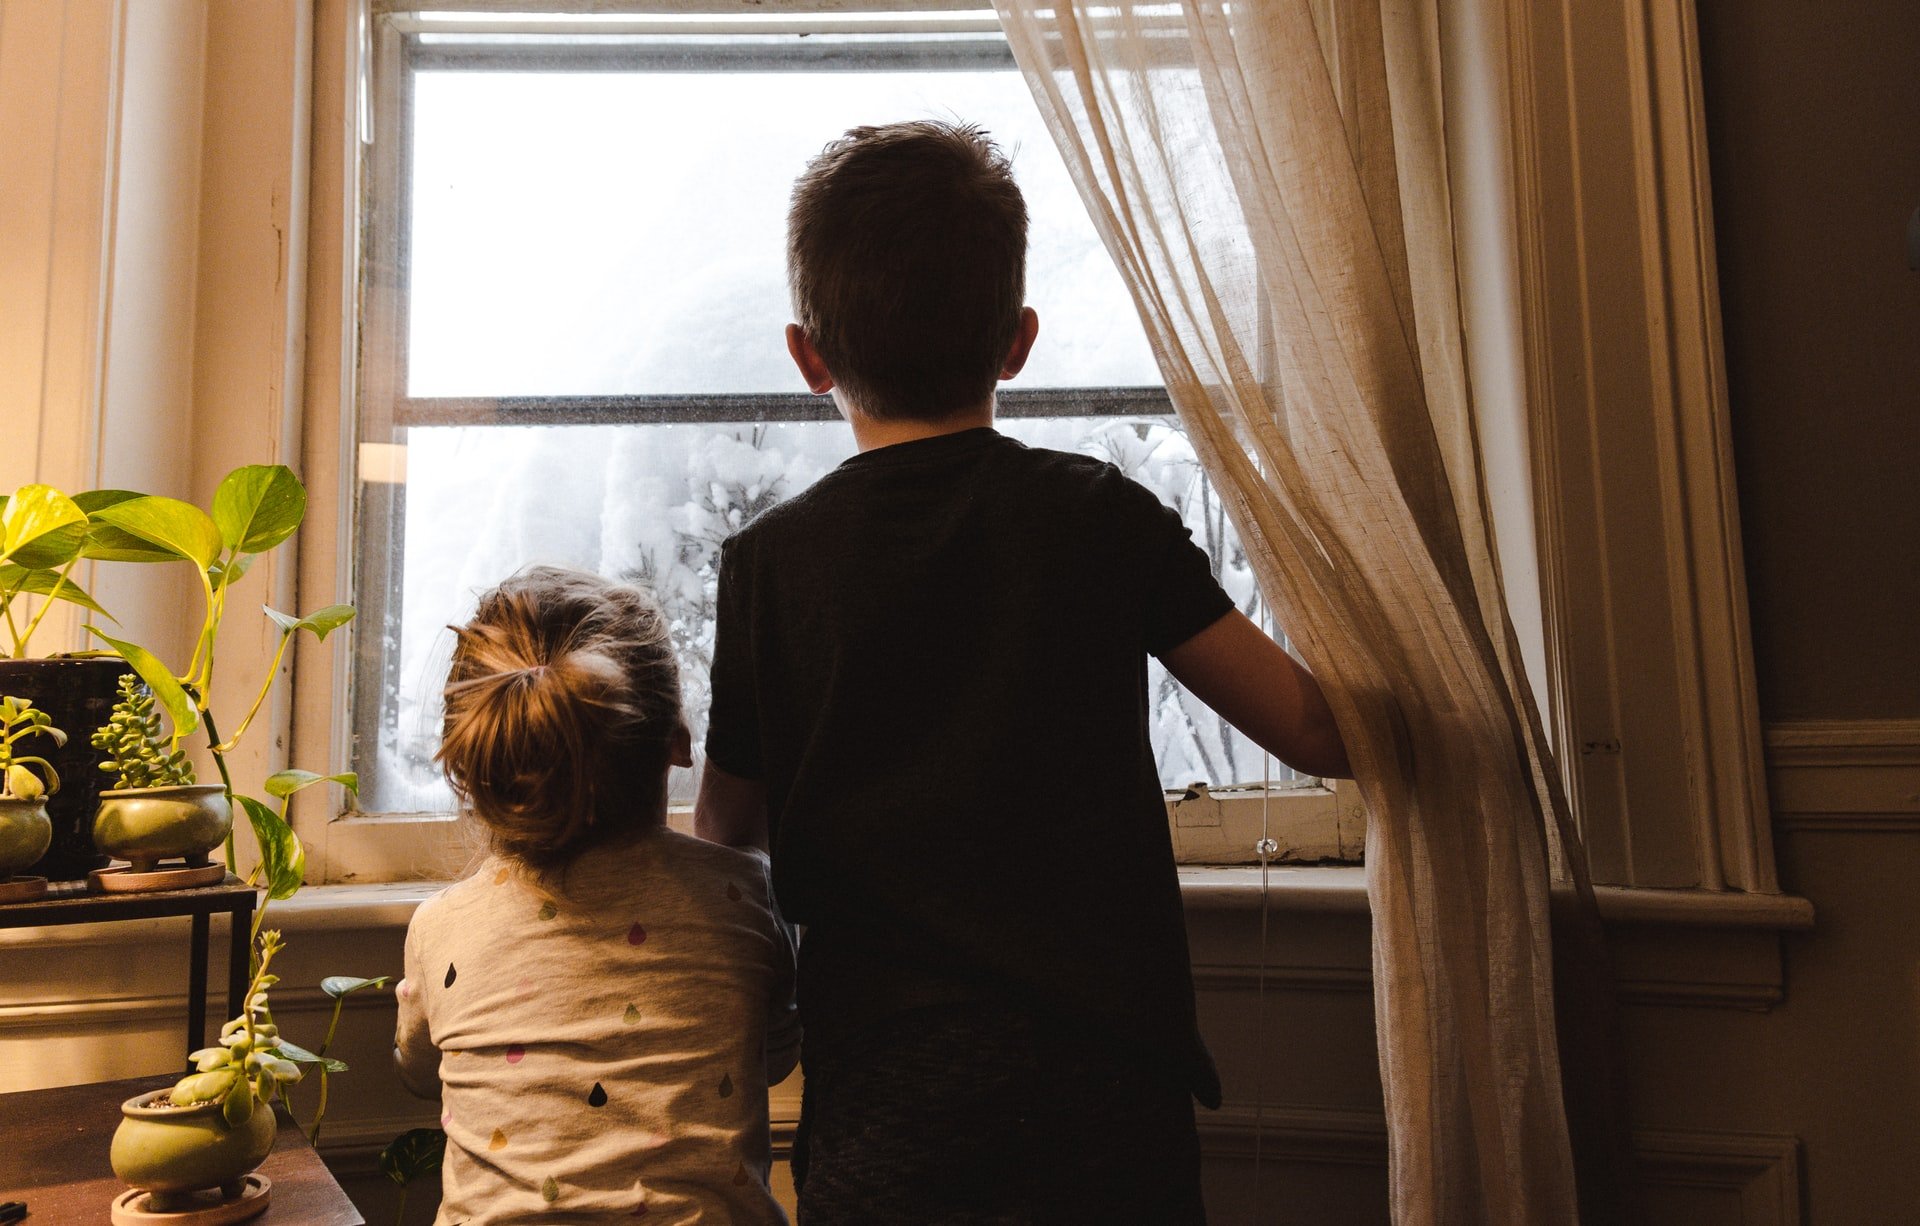 Mike believed OP was the reason his kids would go to sleep hungry | Source: Unsplash